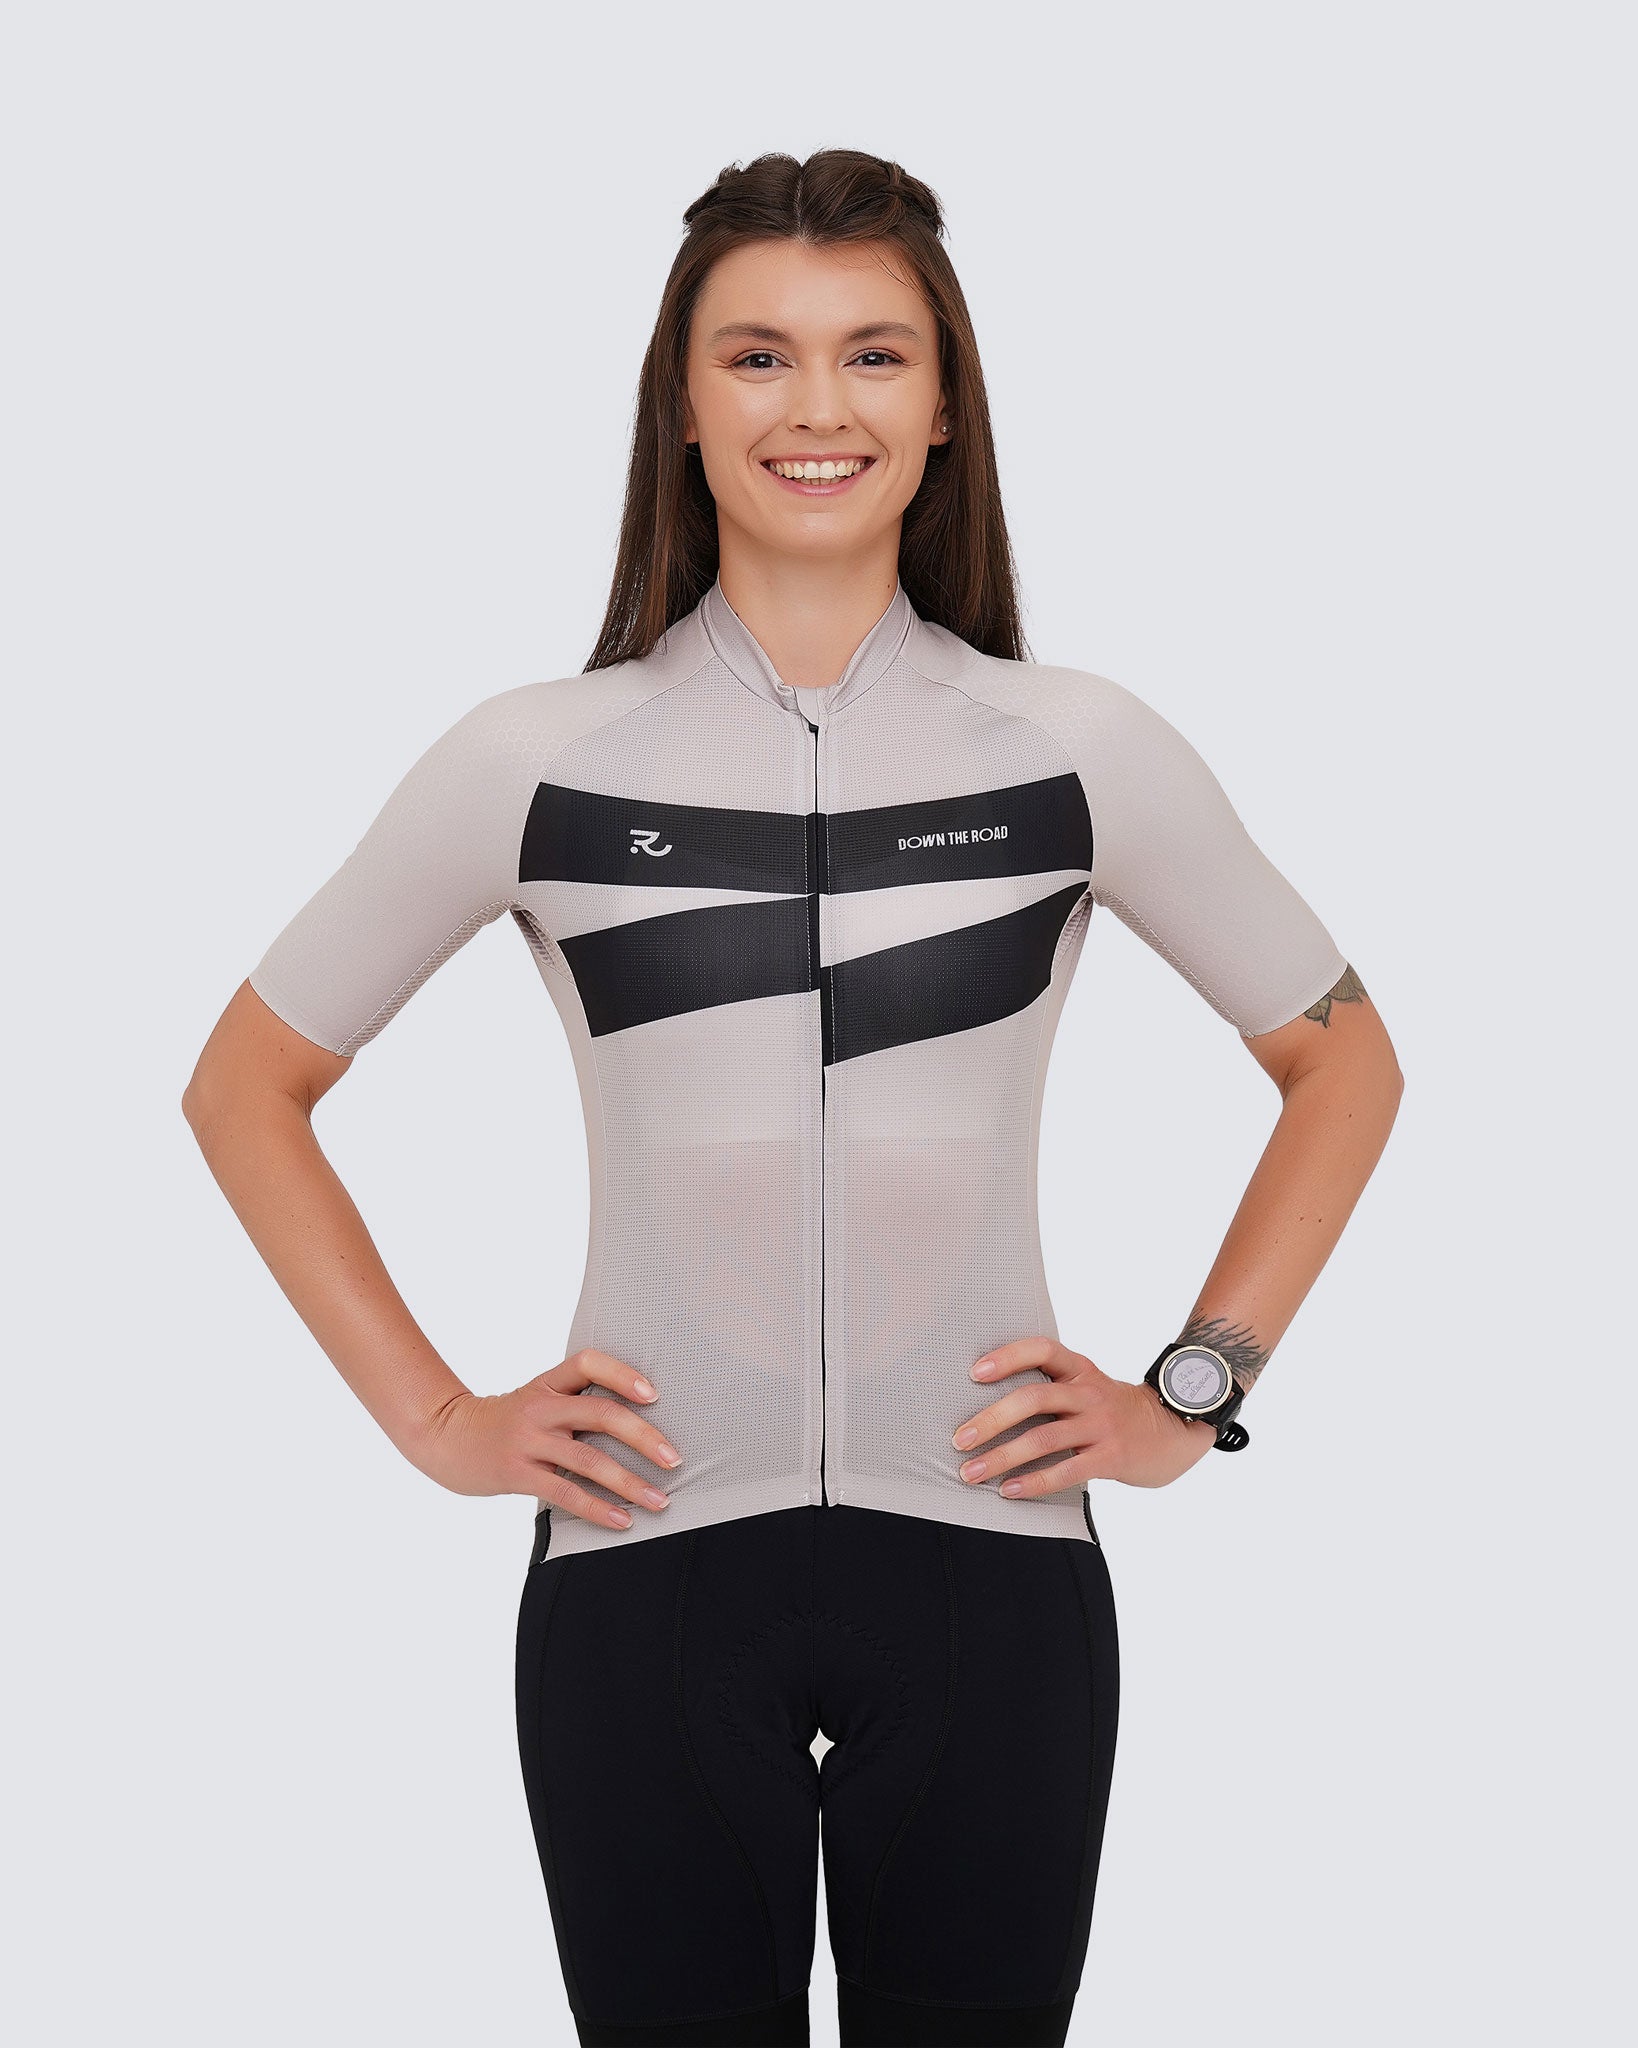 young woman smiling wearing a beige cycling kit